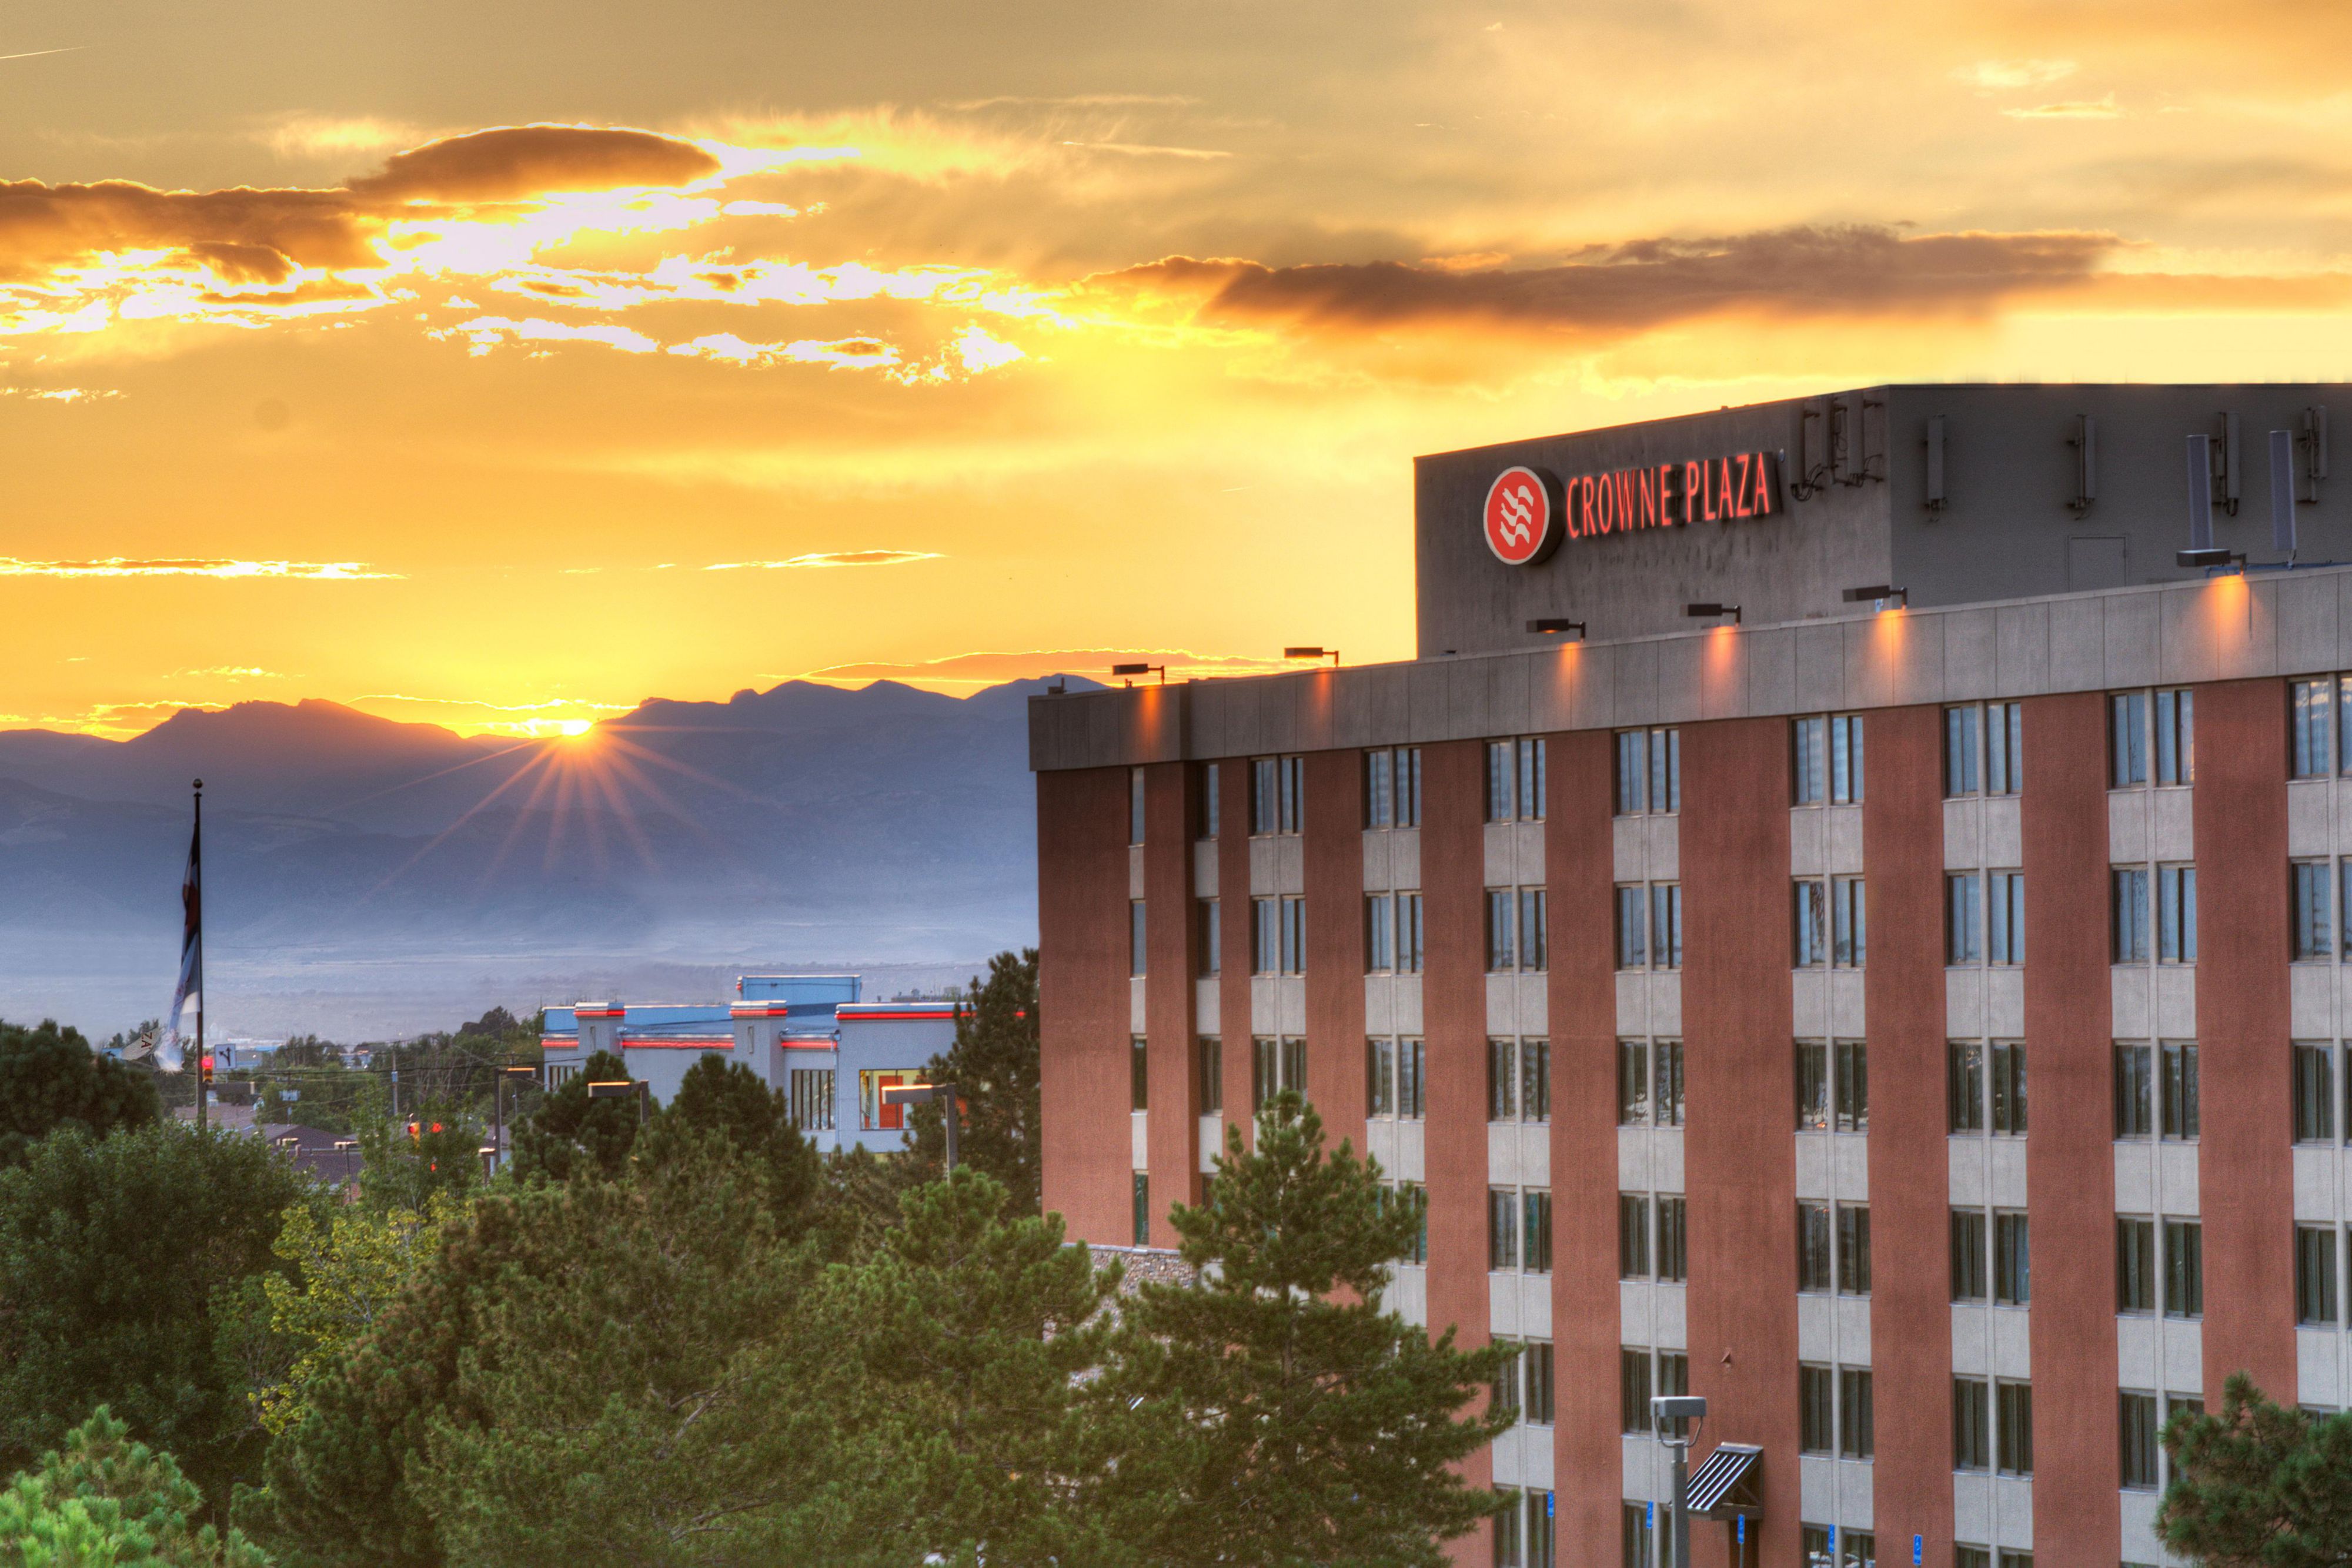 Best hotel just minutes away from the Denver International Airport